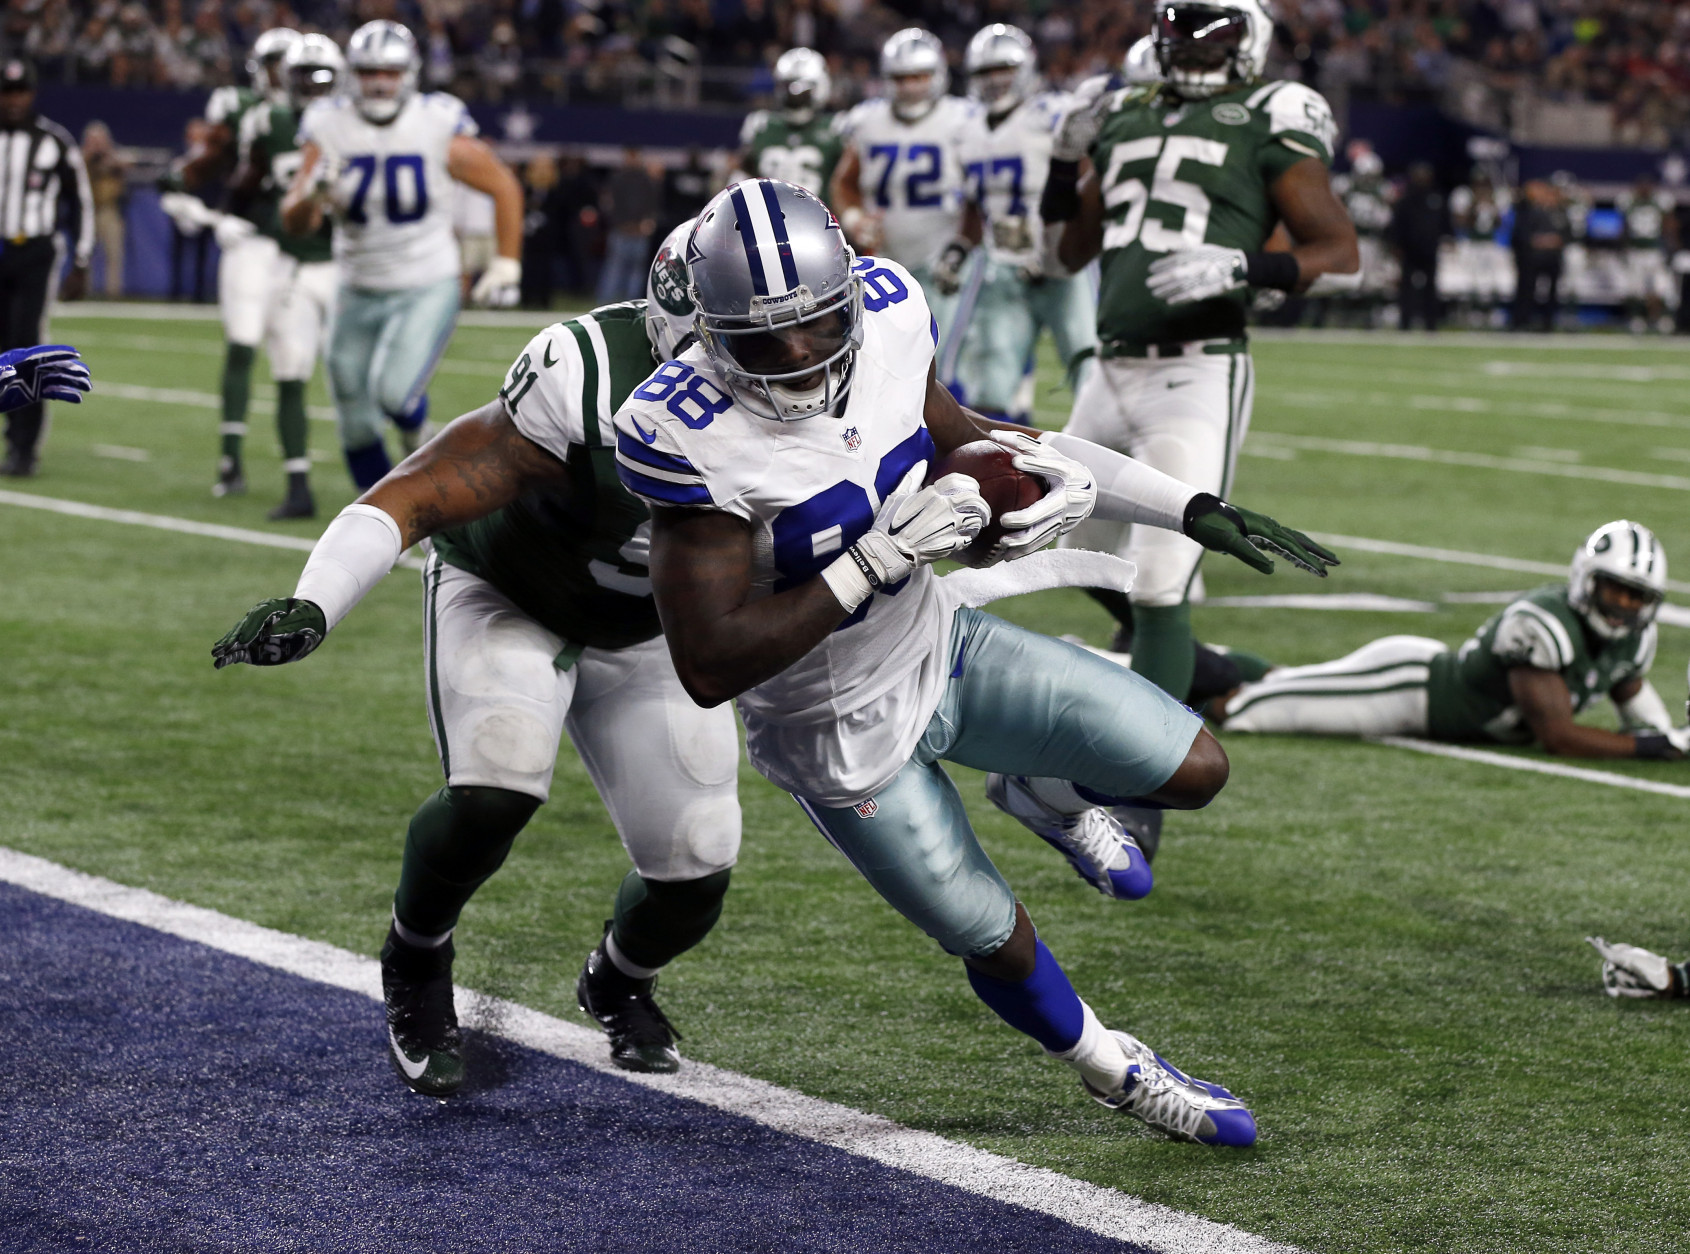 New York Jets defensive end Sheldon Richardson (91) is unable to stop Dallas Cowboys' Dez Bryant (88) from entering the end zone for a touchdown after catching a pass from quarterback Kellen Moore in the first half of an NFL football game, Saturday, Dec. 19, 2015, in Arlington, Texas. (AP Photo/Brandon Wade)